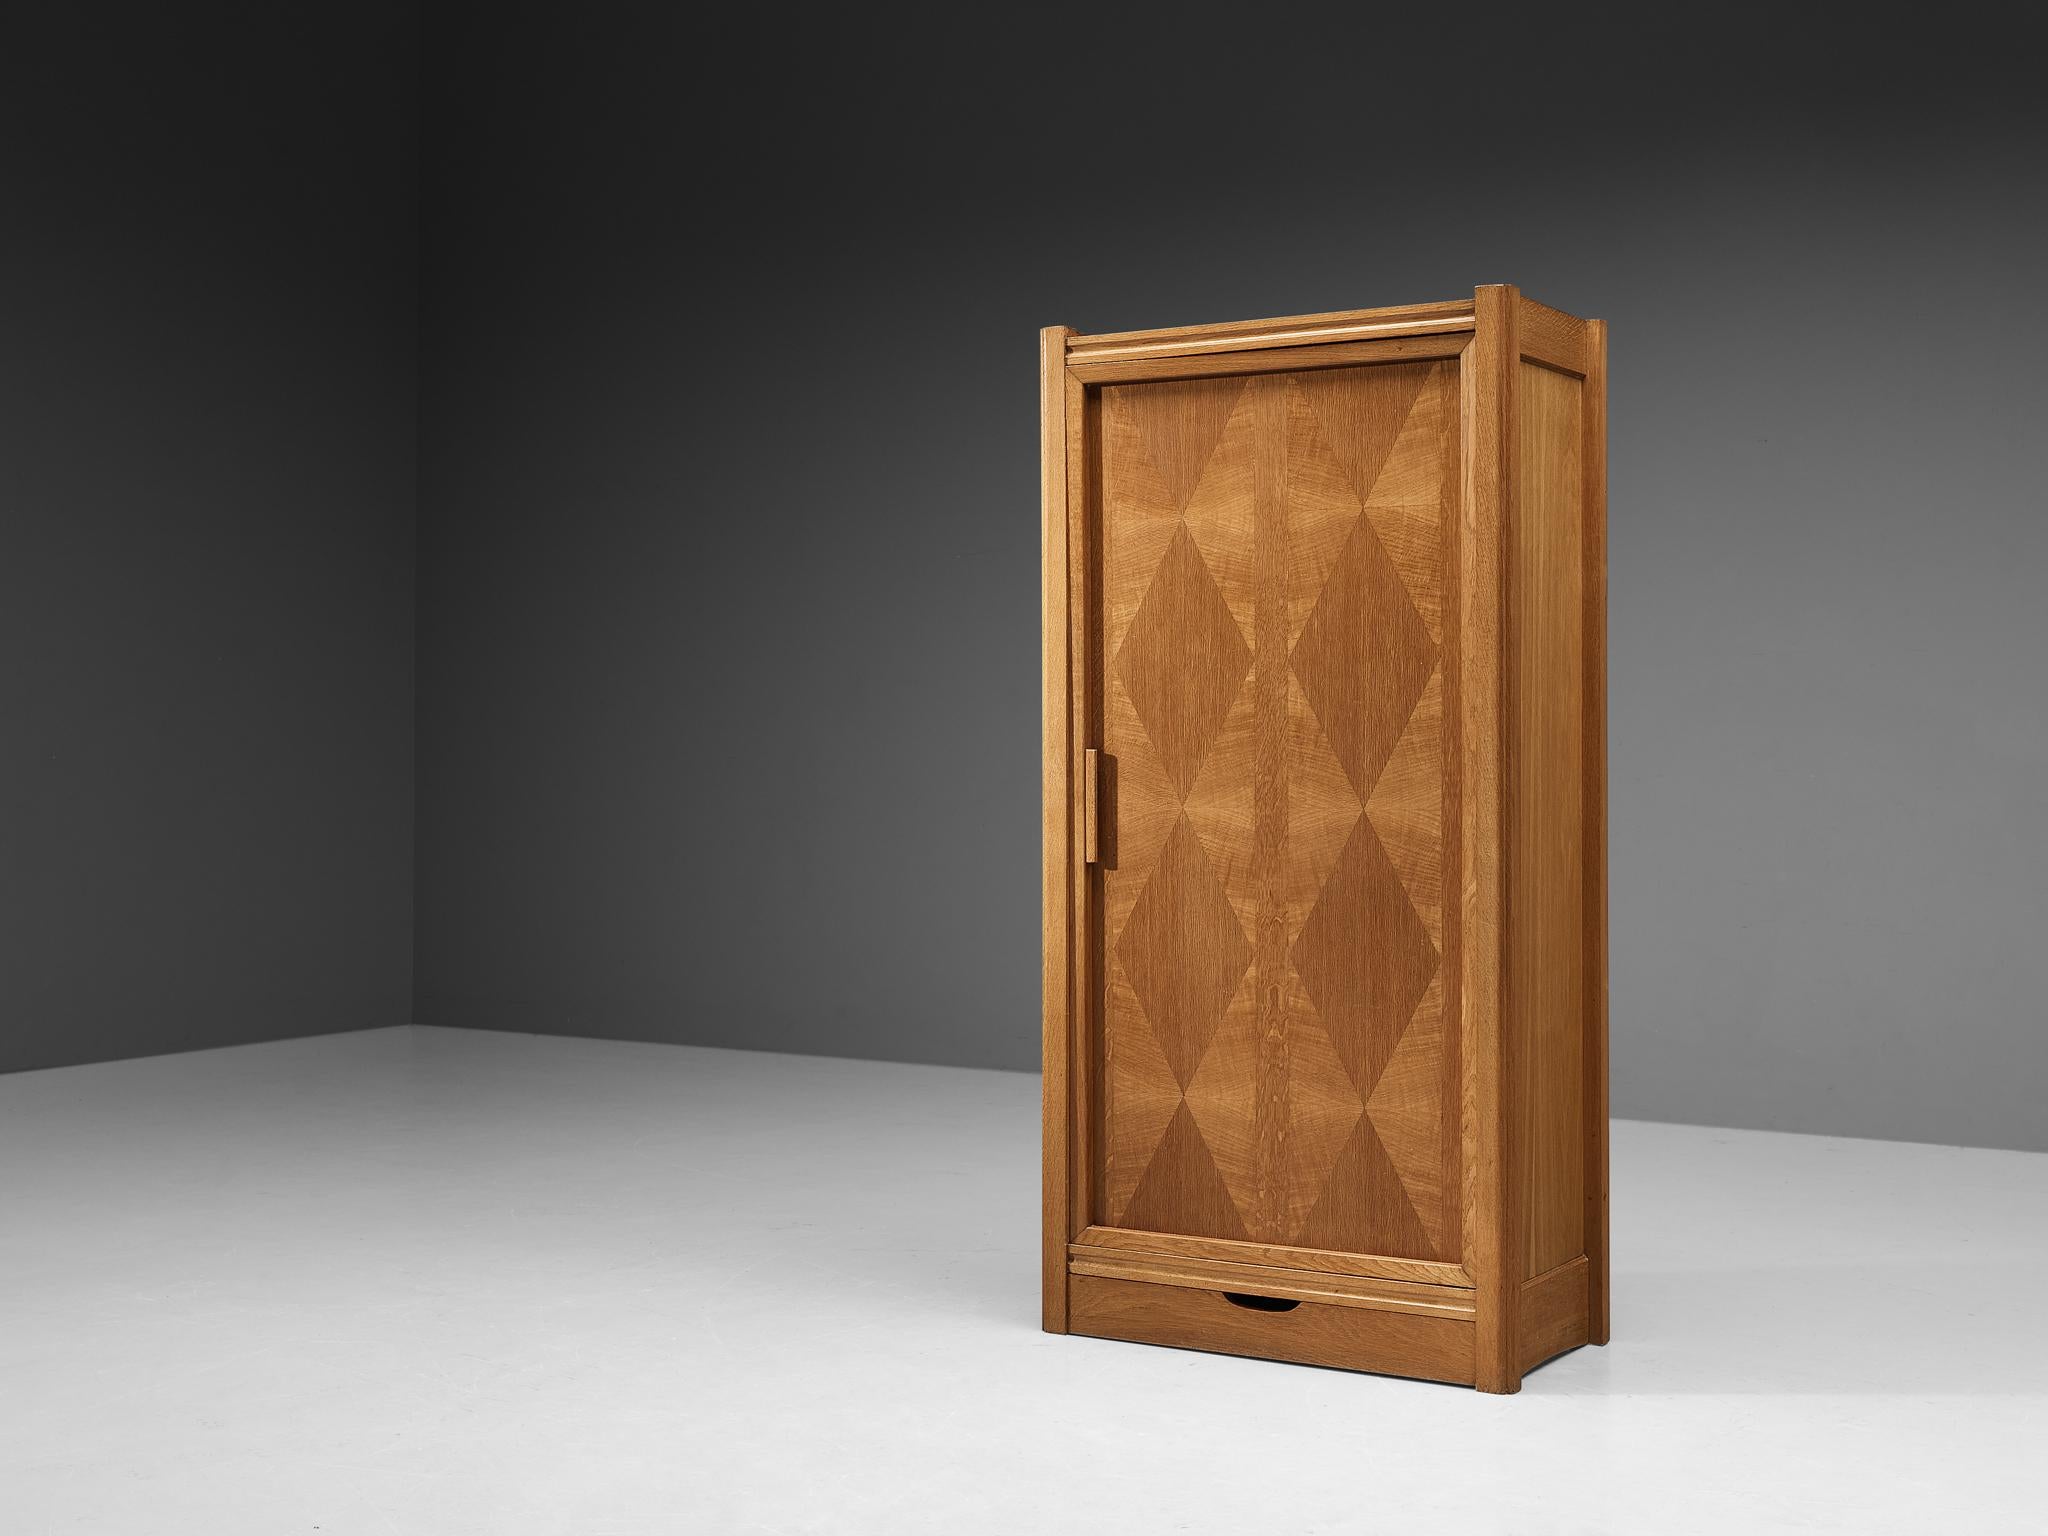 Guillerme et Chambron for Votre Maison, cabinet, oak, France, 1960s

This wardrobe is designed by Guillerme and Chambron and features geometric oak inlays, which is characteristic for the French designer duo. Equipped with one front door panel